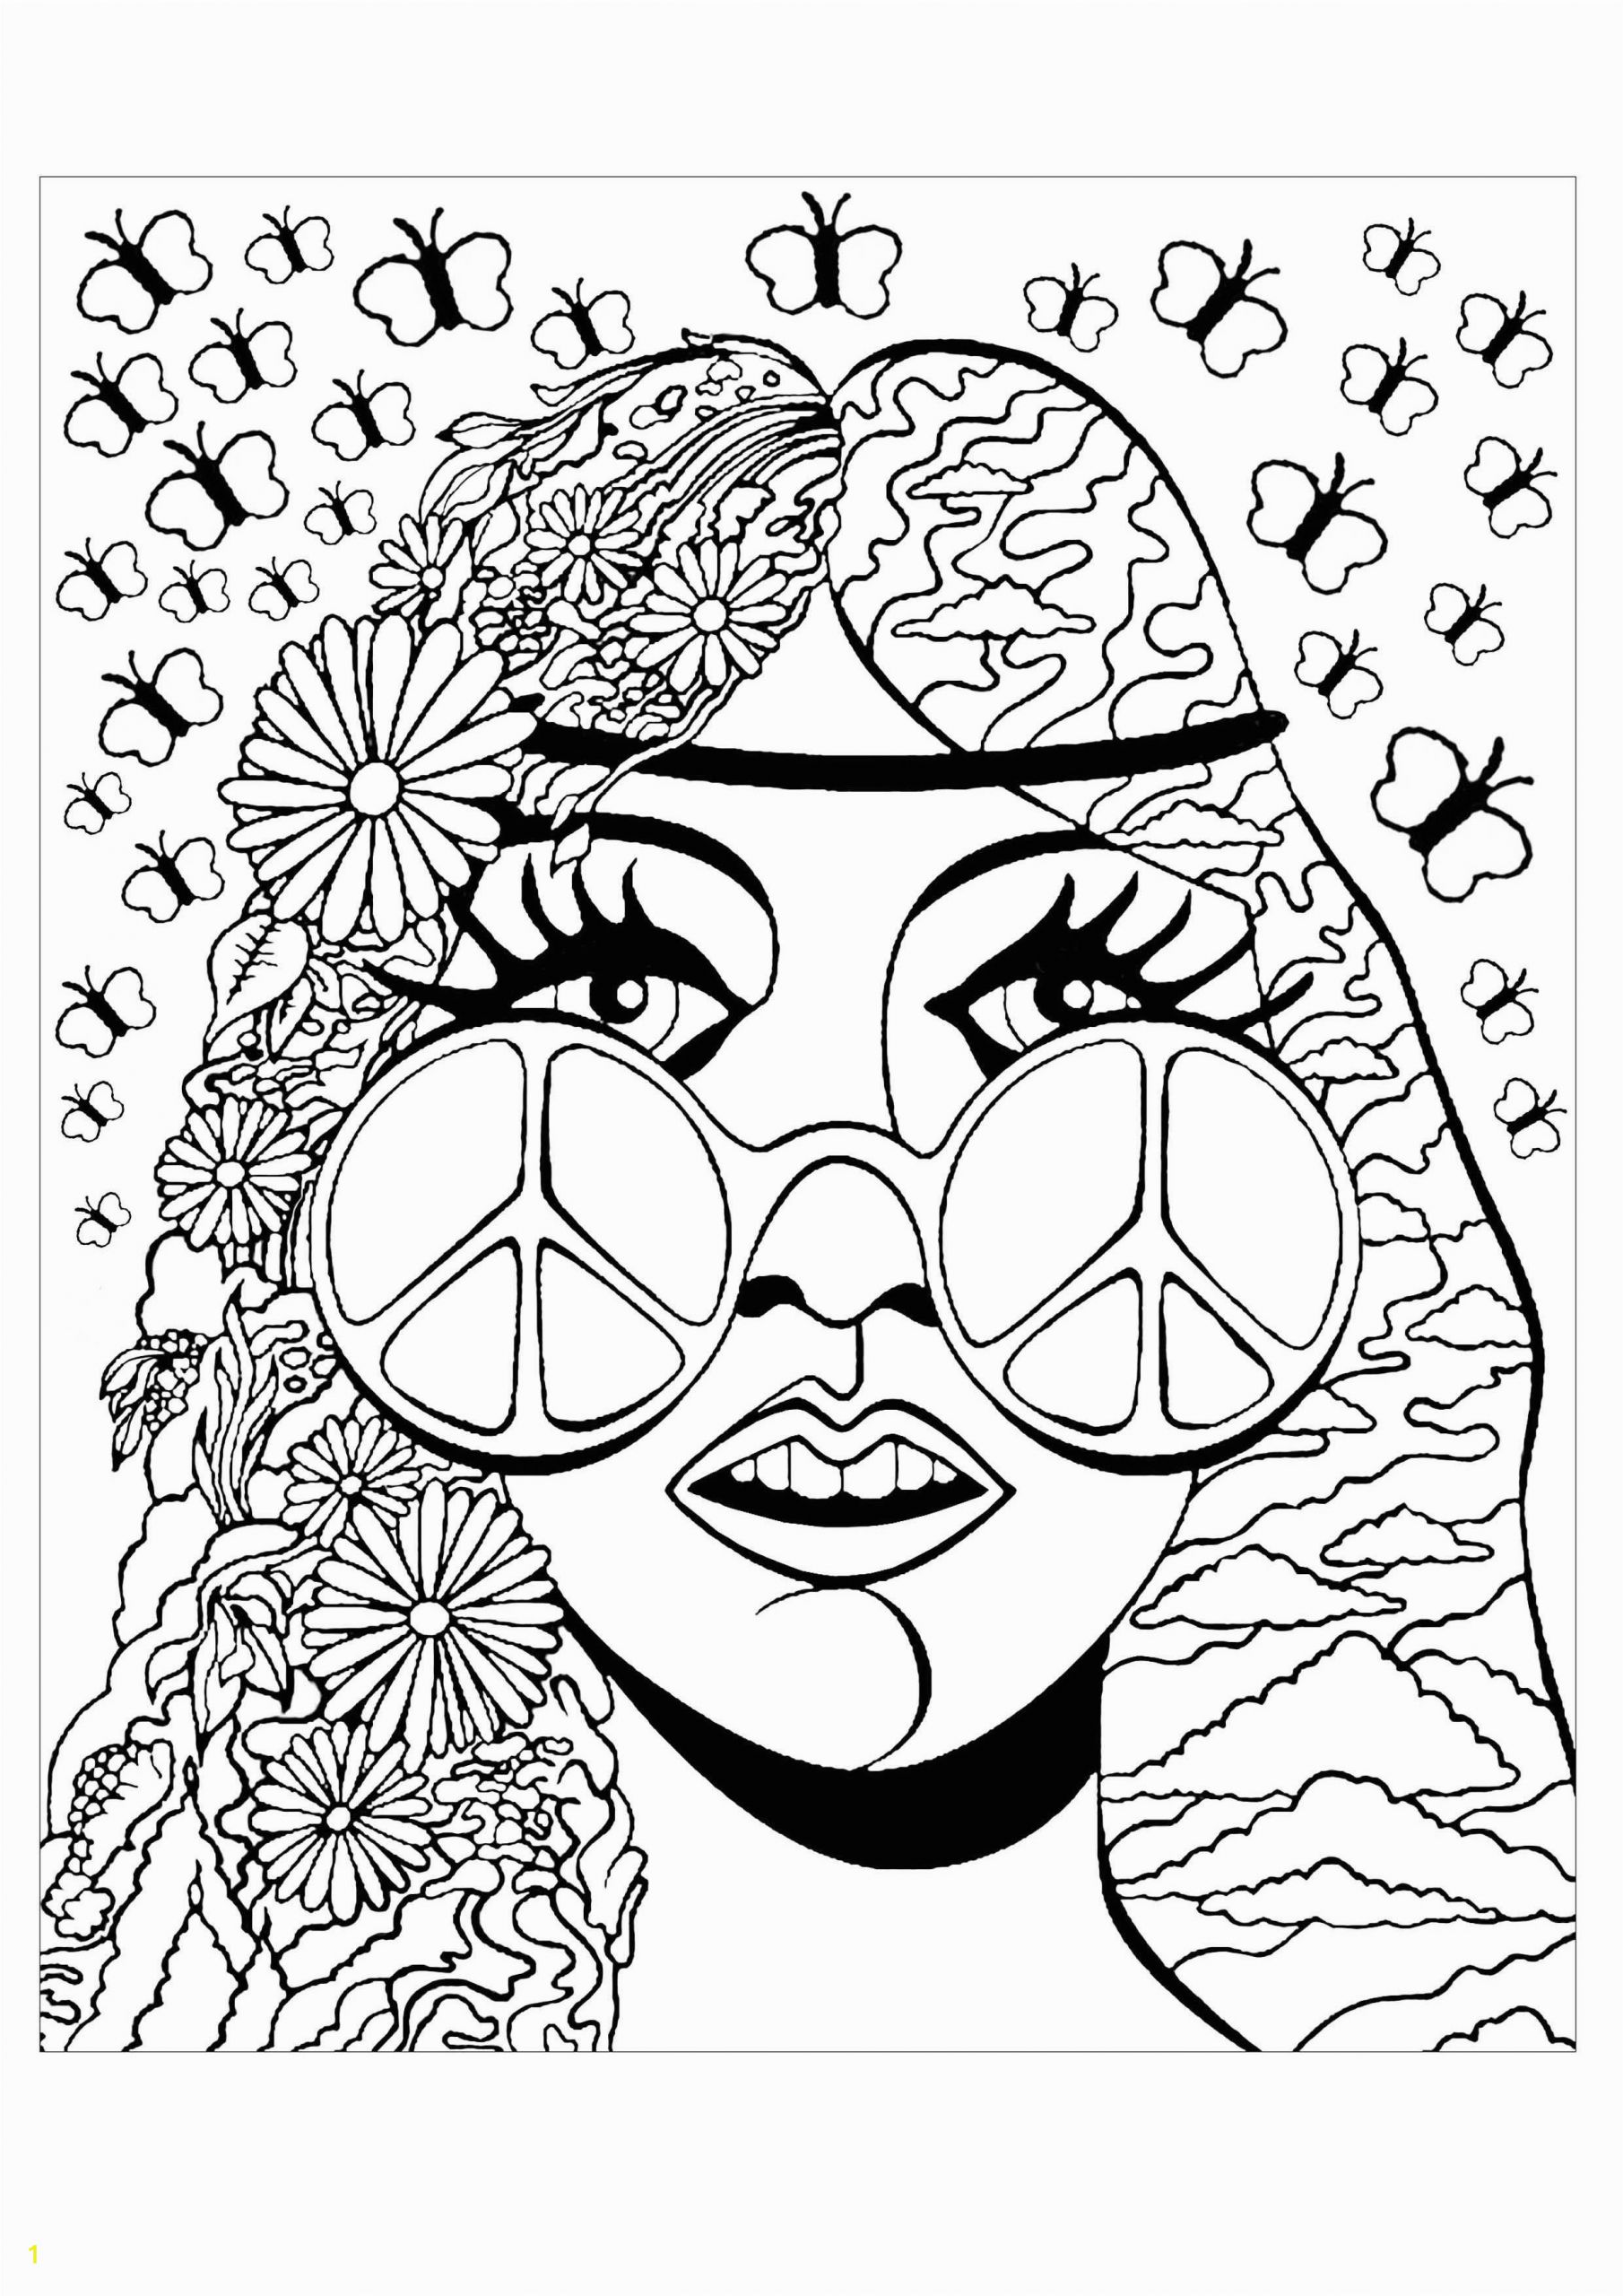 Printable Trippy Coloring Pages for Adults Psychedelic Girl butterflies Psychedelic Coloring Pages